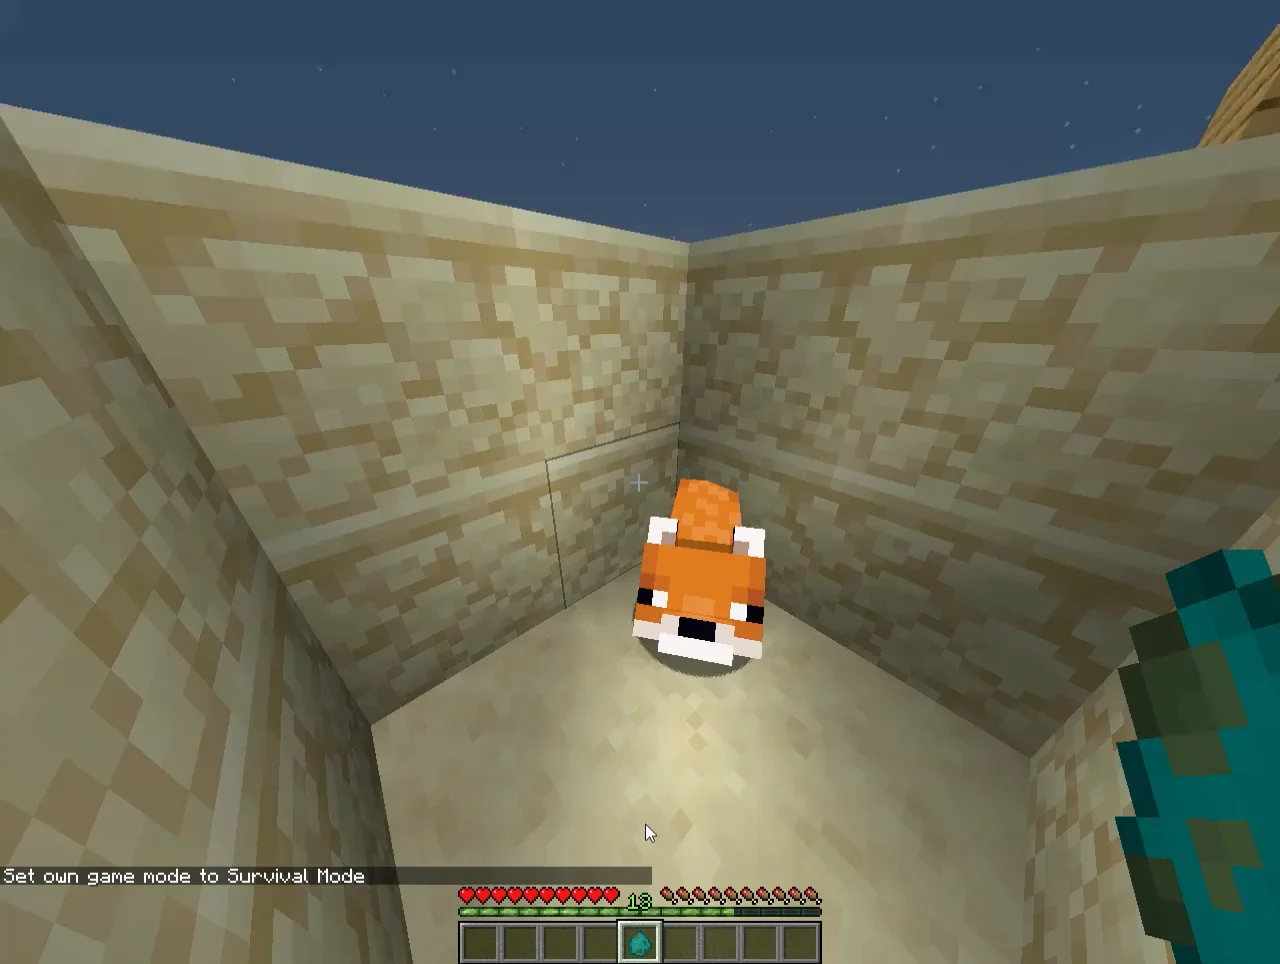 Interact with the Tamed Fox